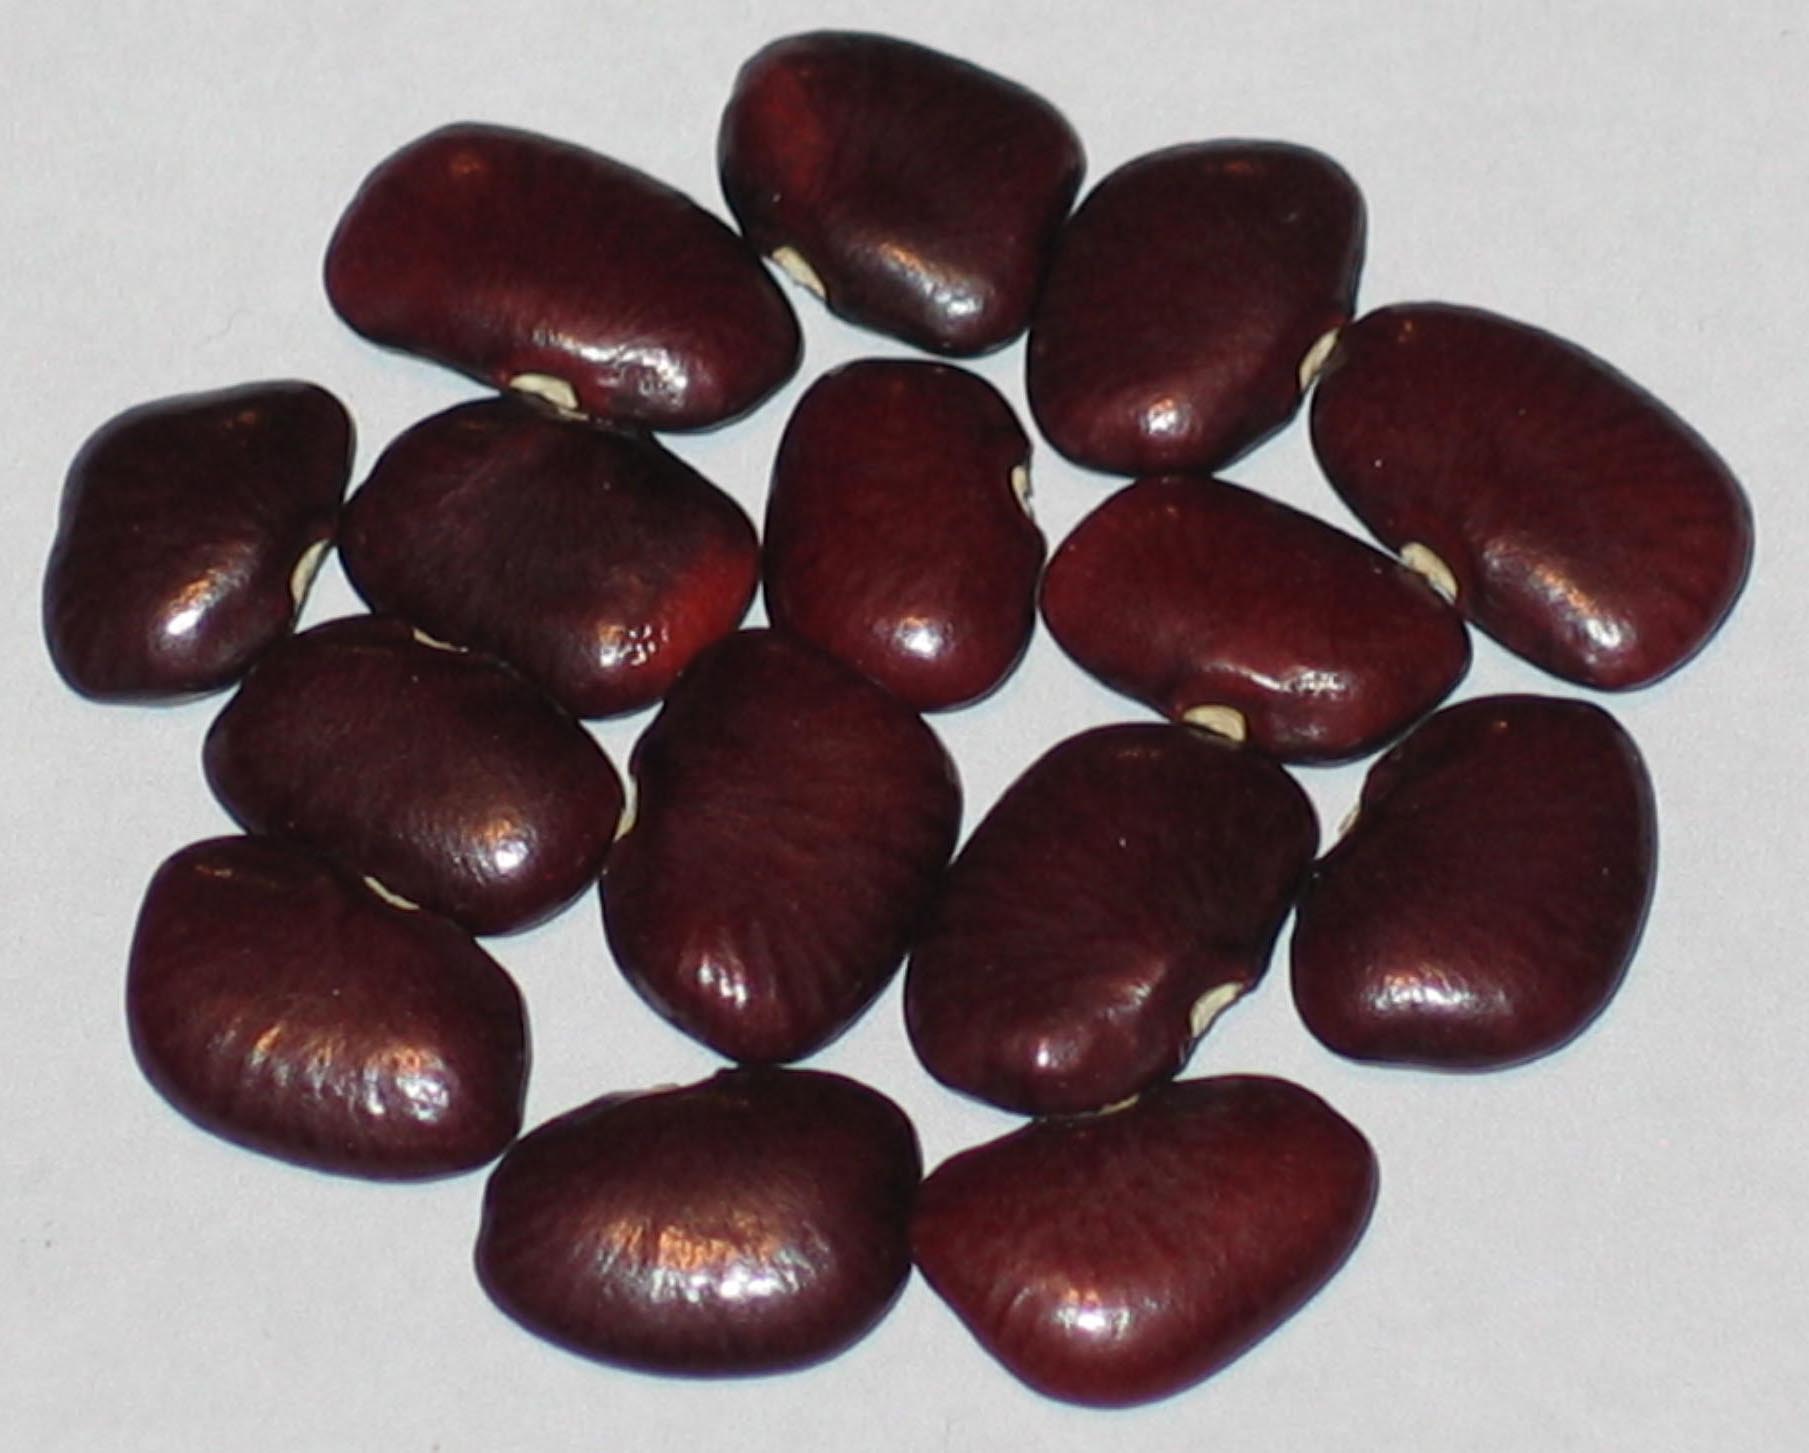 image of Indian Red beans